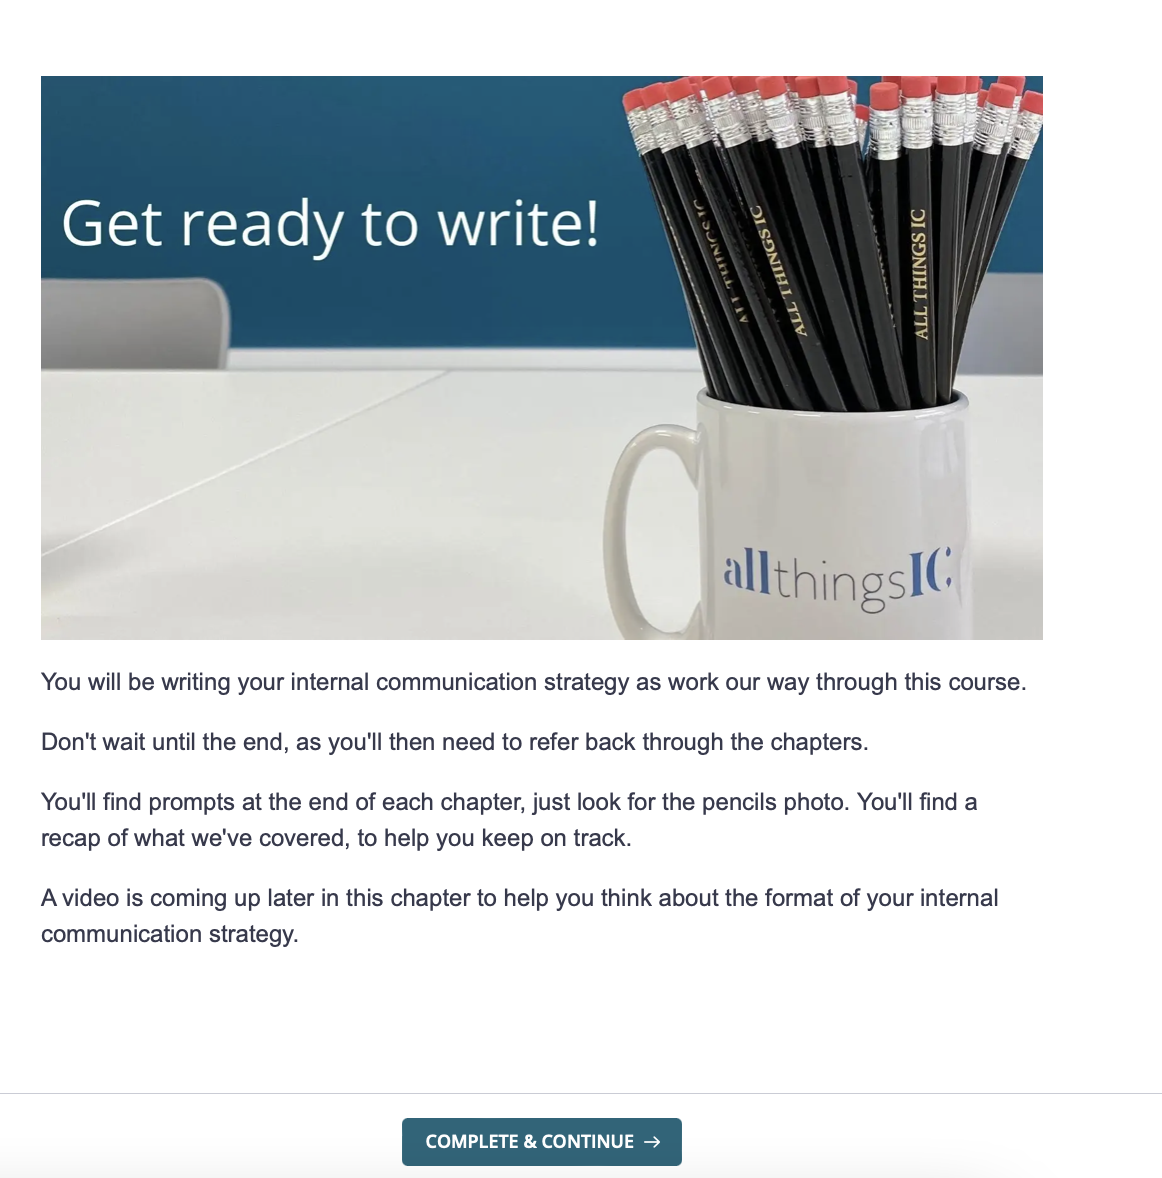 Photo of All Things IC pencils in a mug. Text: Get ready to write! 